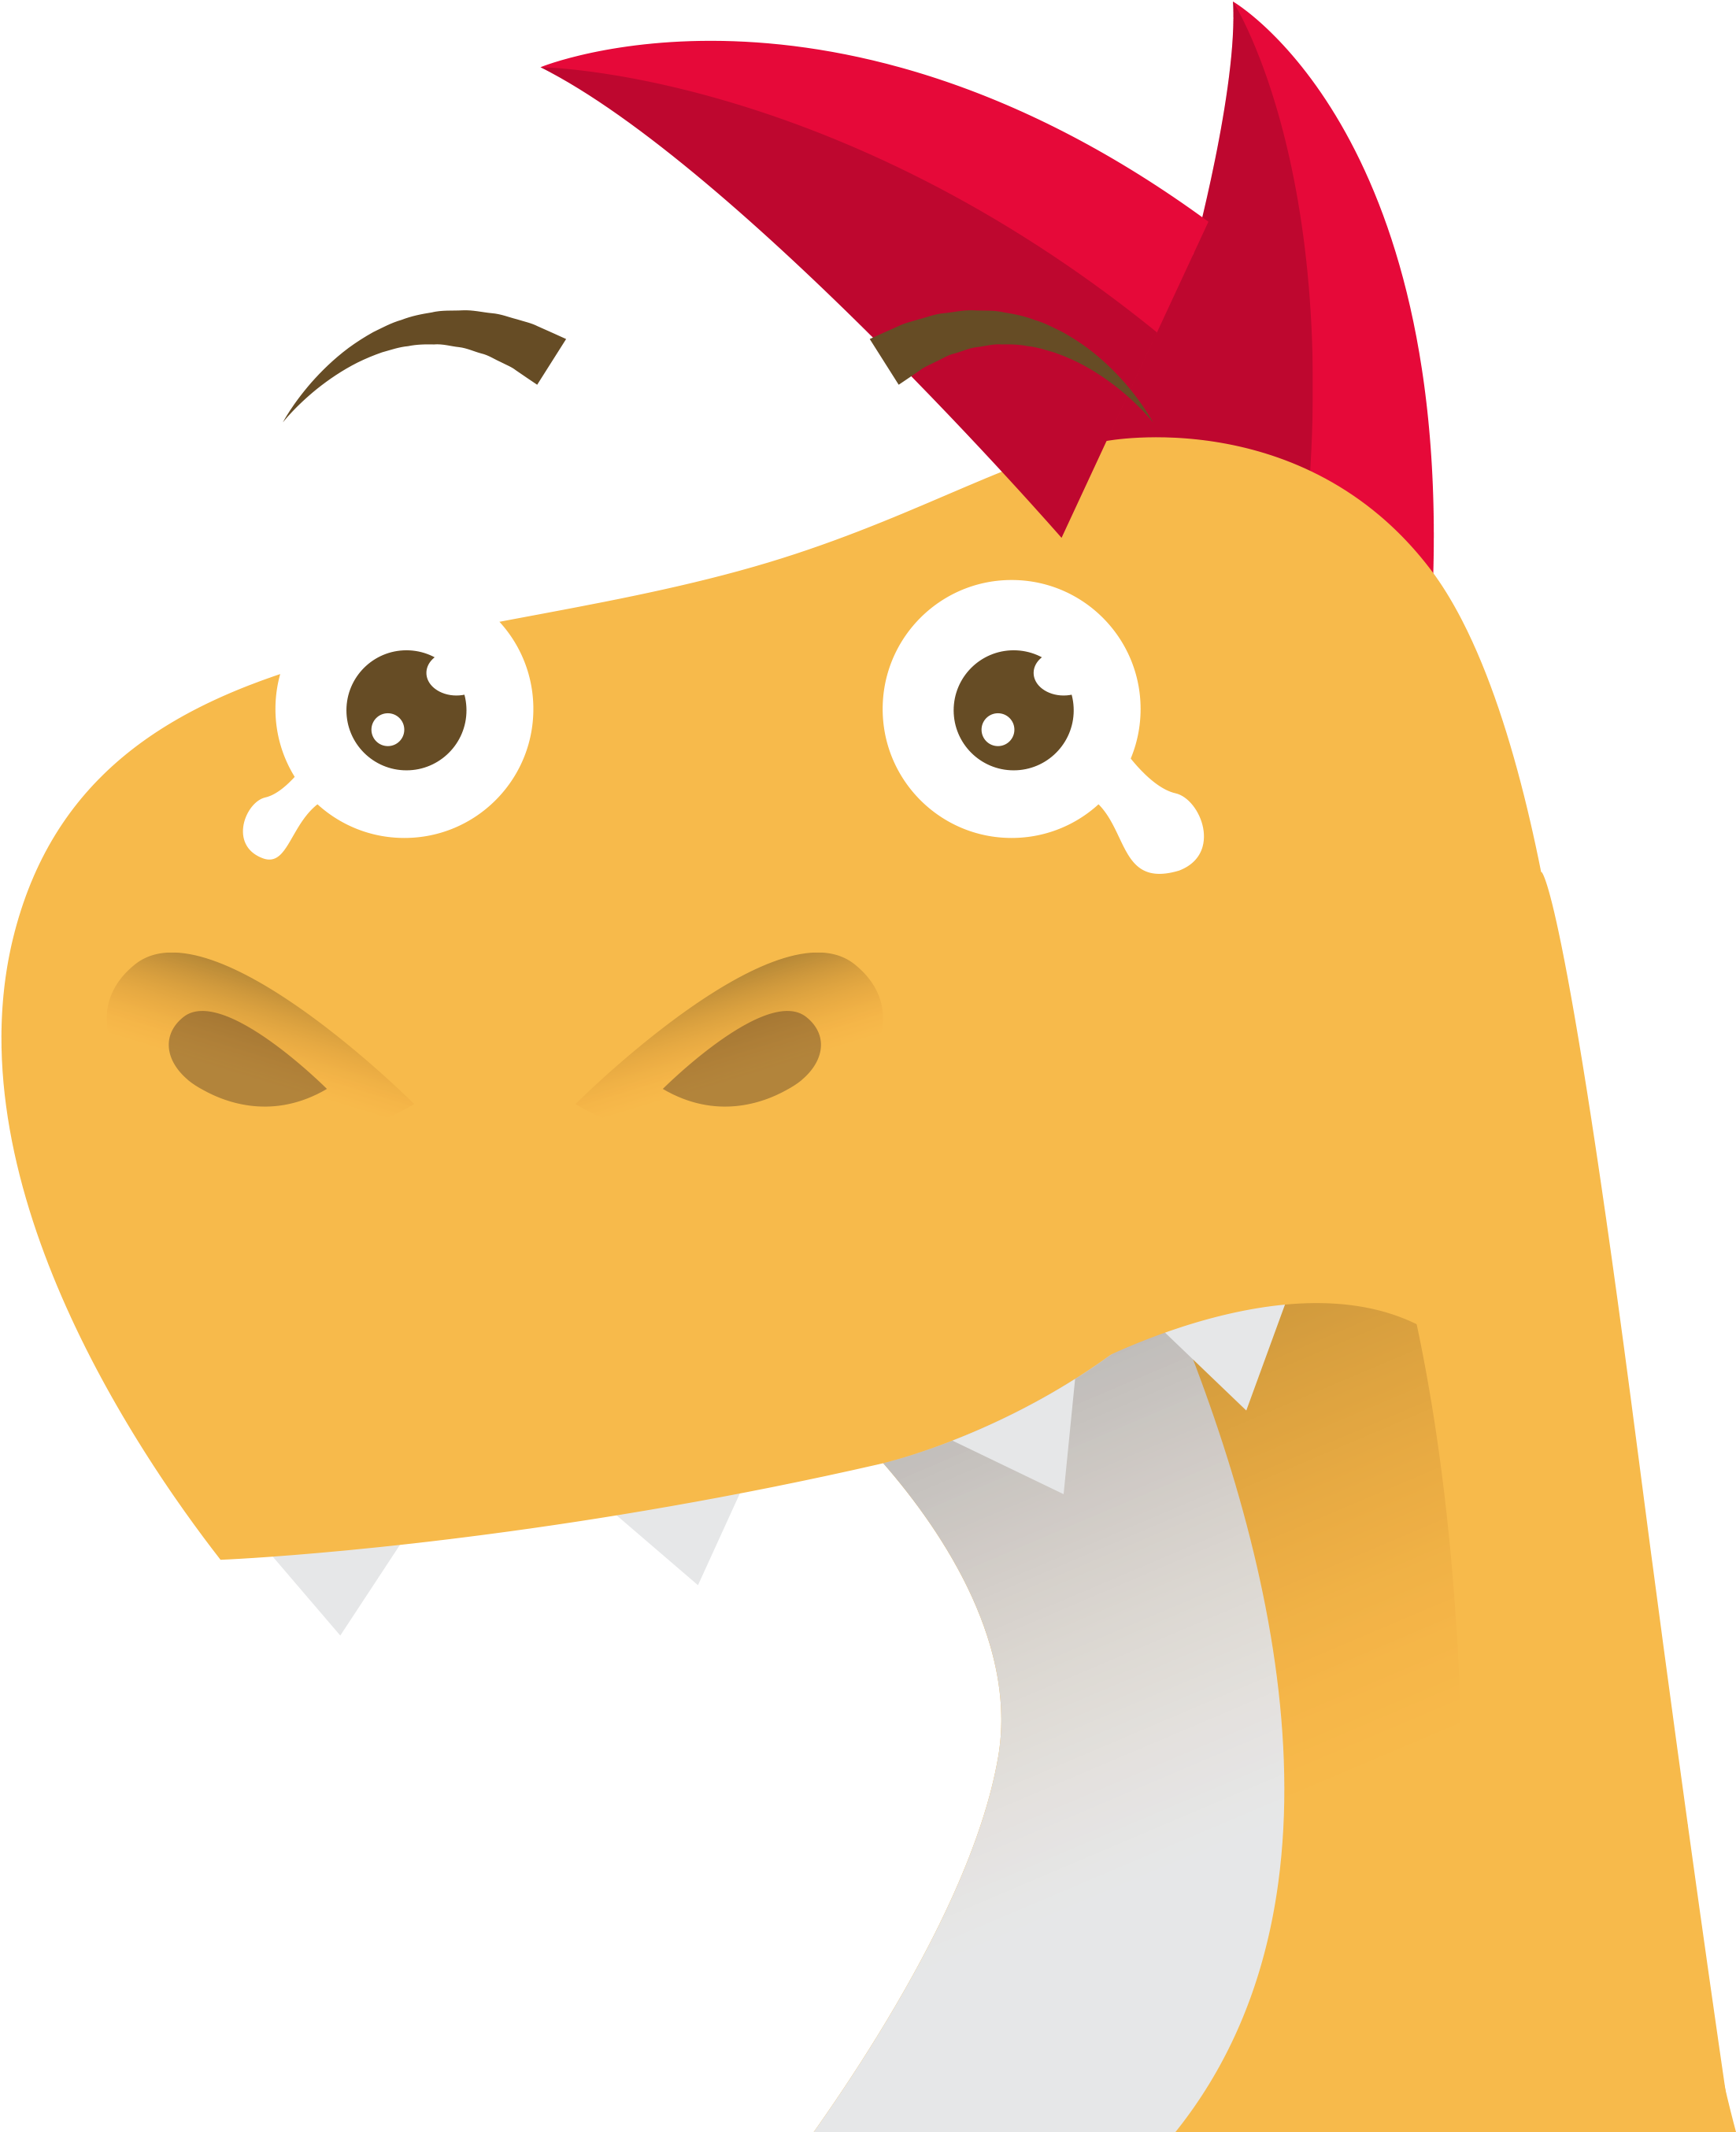 A Dinosaur Sad Girl Crying Lying On A Pillow Vector - Saywhat - Video Dictionary App (2782x2776)